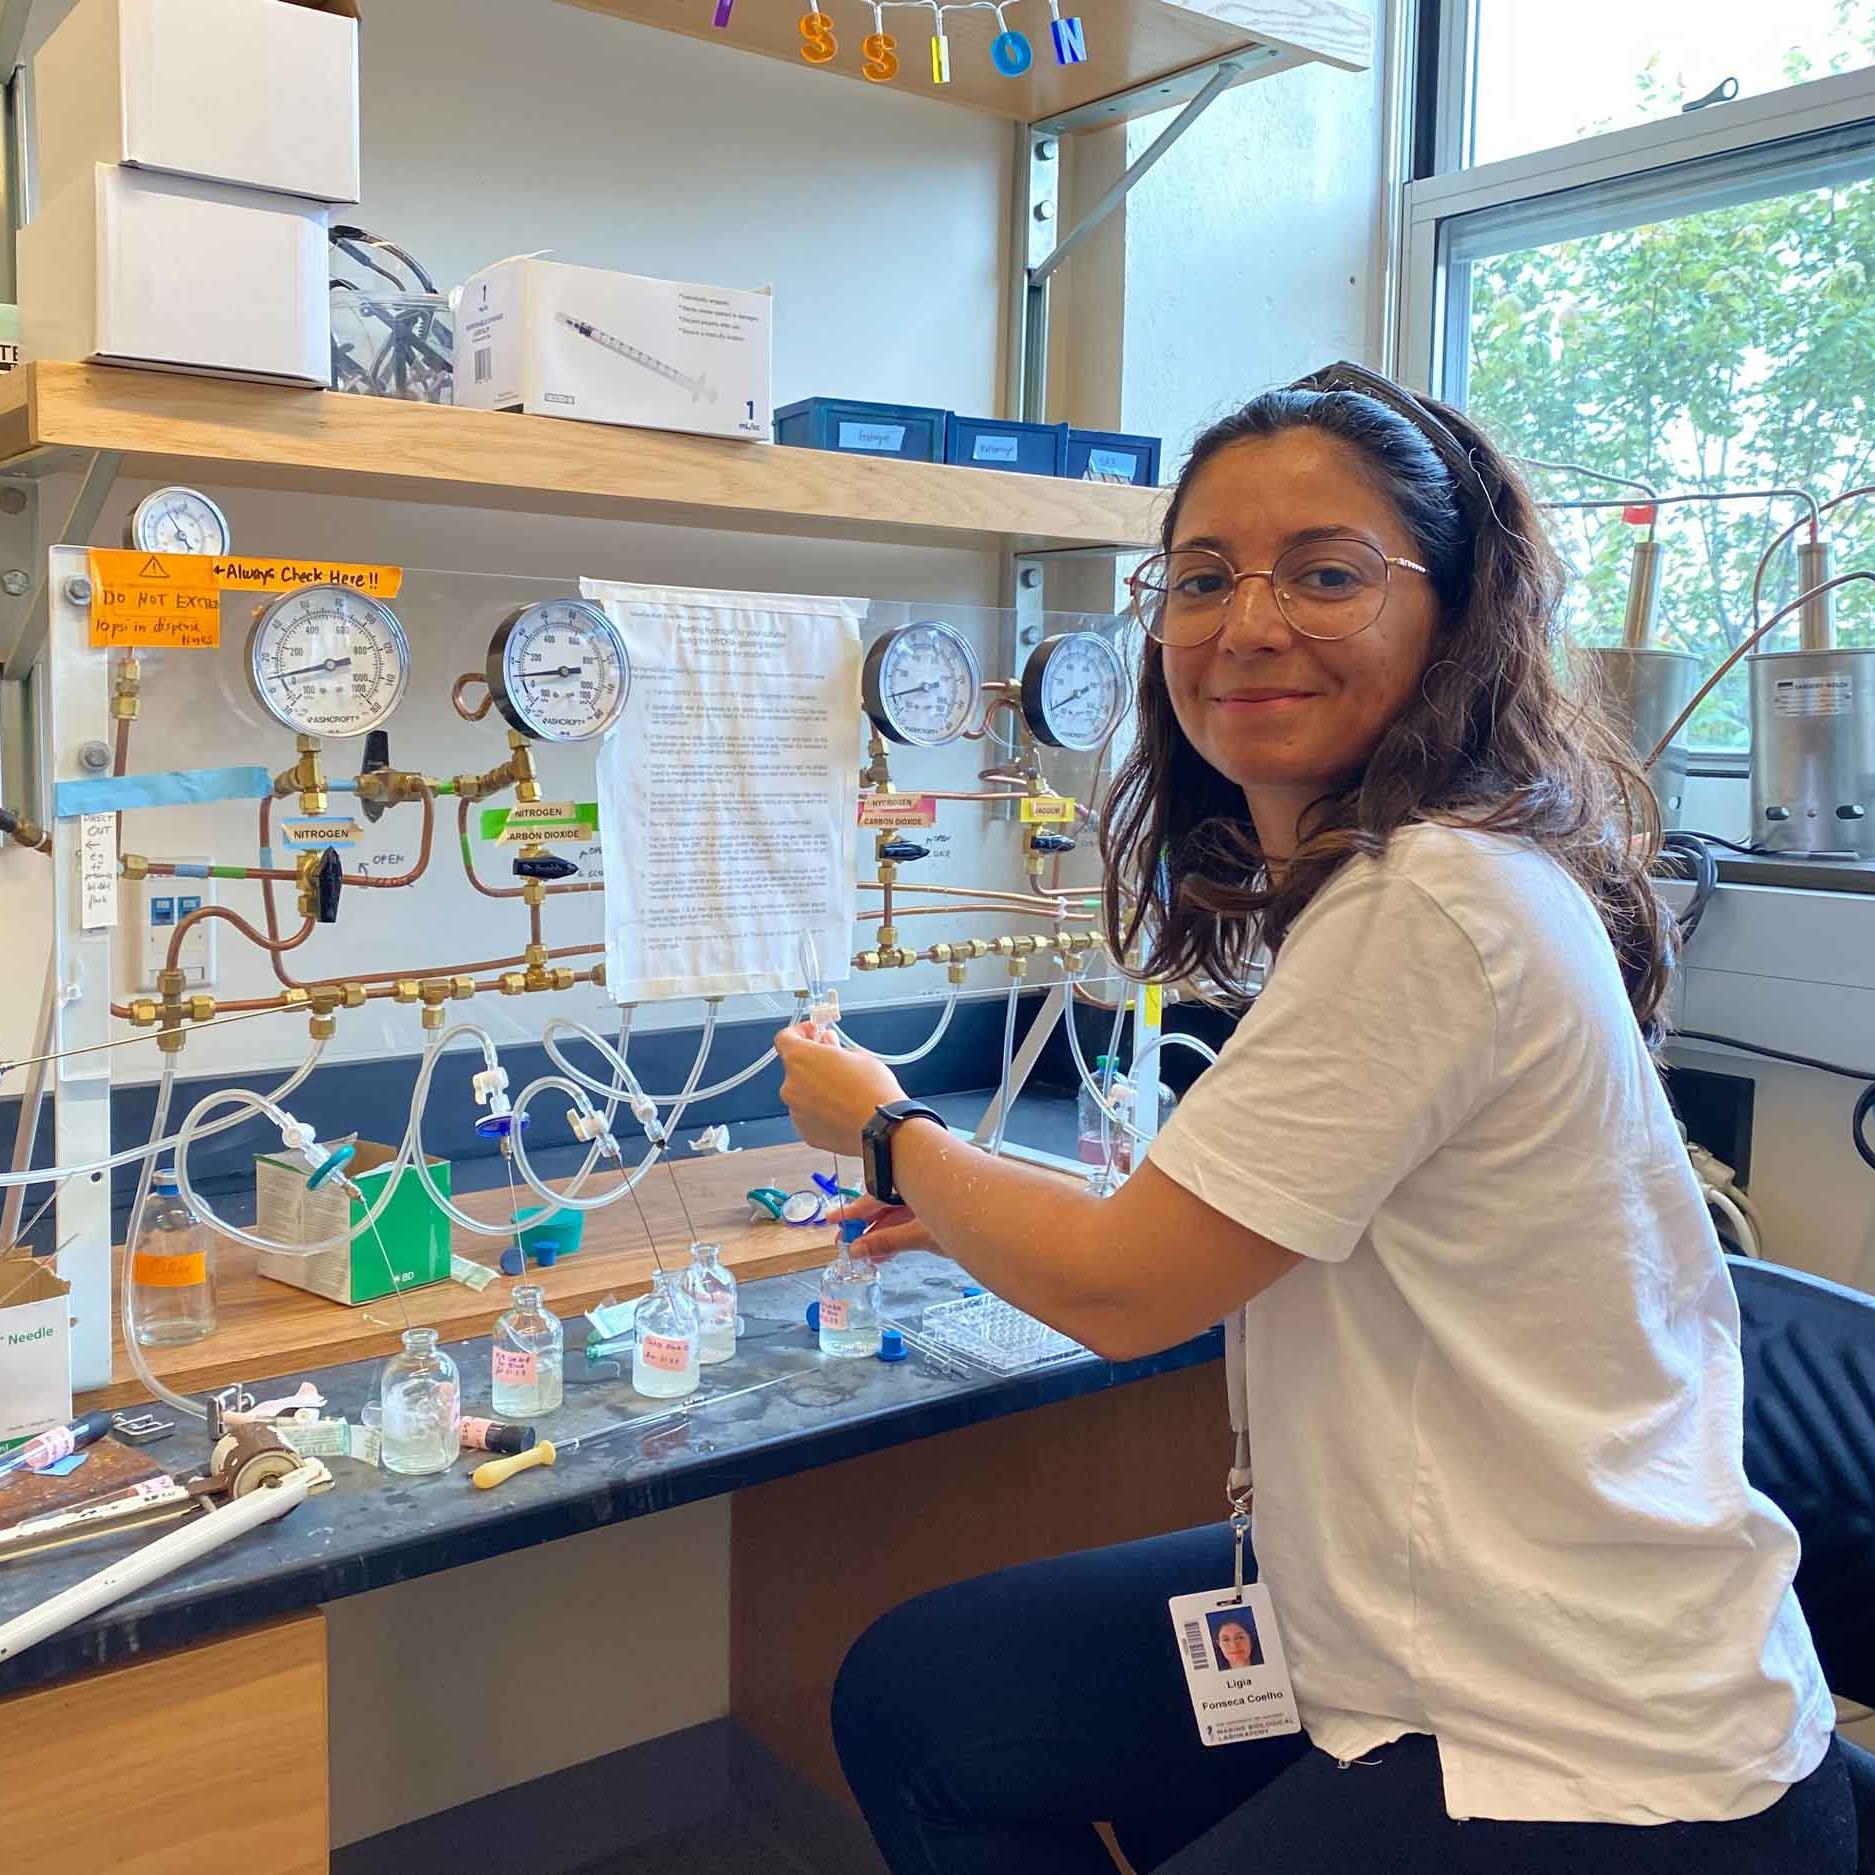 		Ligia Coelho, with wire glasses and t-shirt, smiling at the camera next to her lab bench with dials and beakers and wires connecting them
	